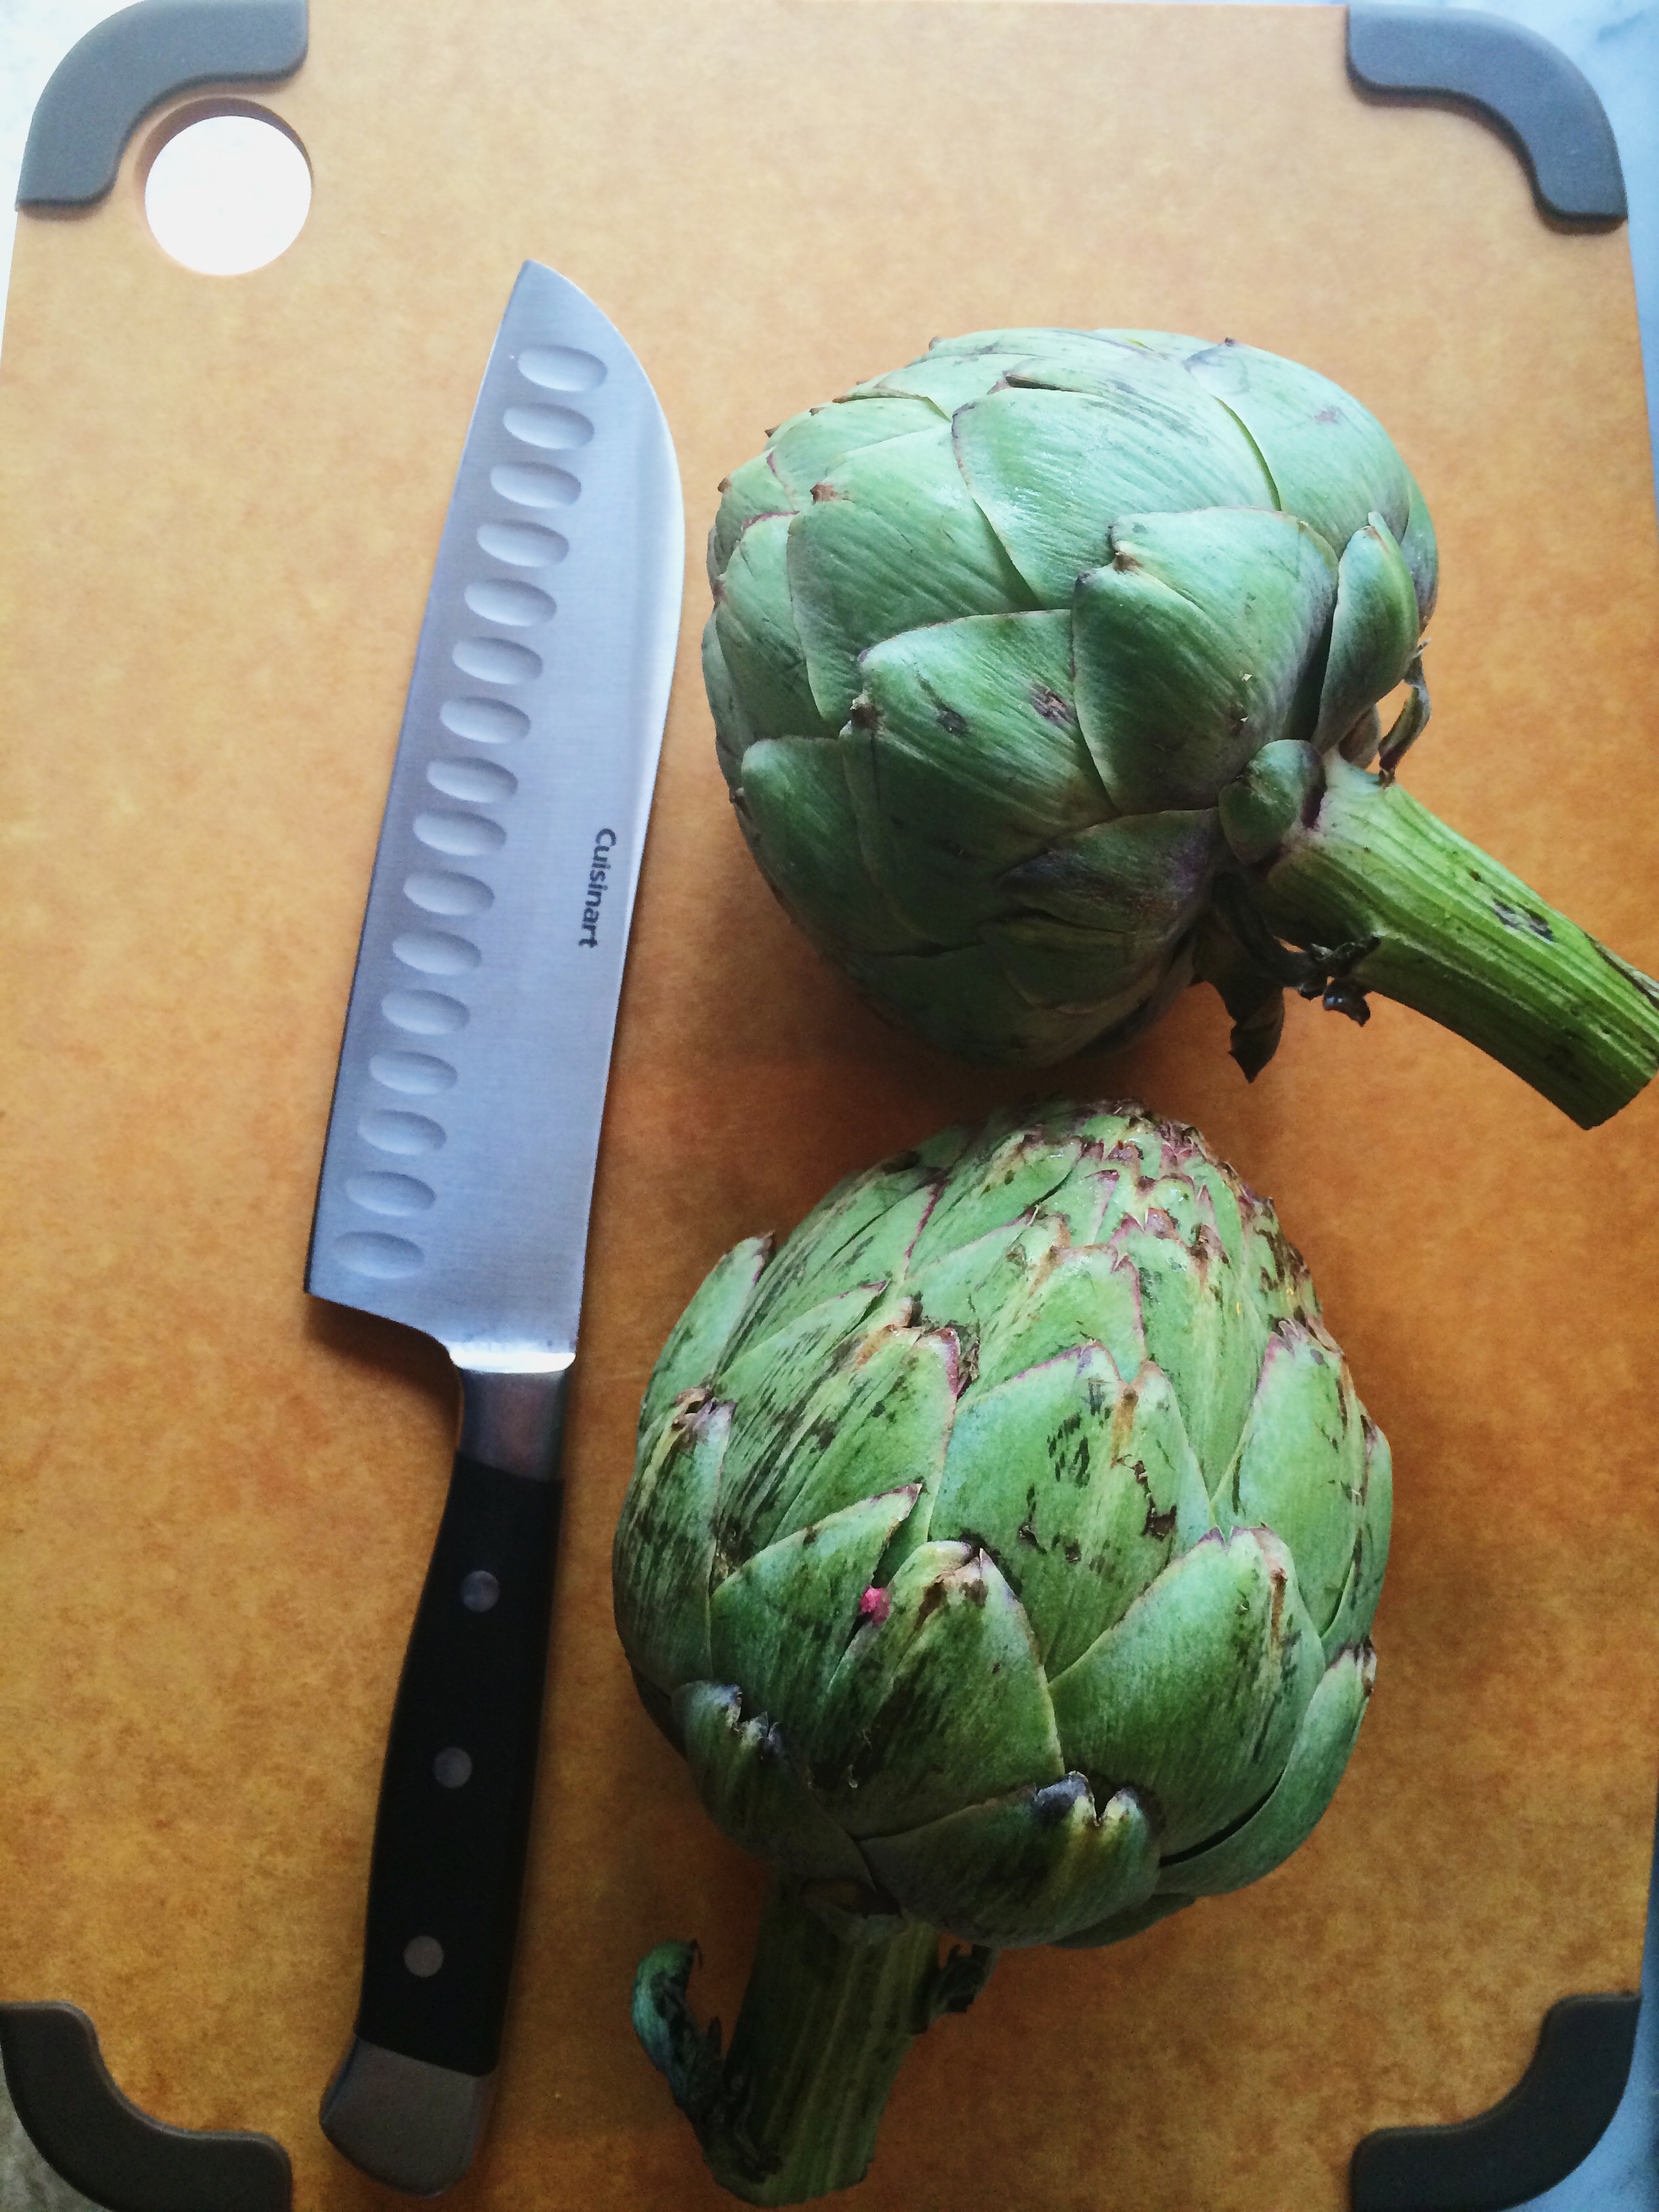 Artichokes for dinner. I will eat them and think of Mrs. Calomiris. Photo by María Helena Carey